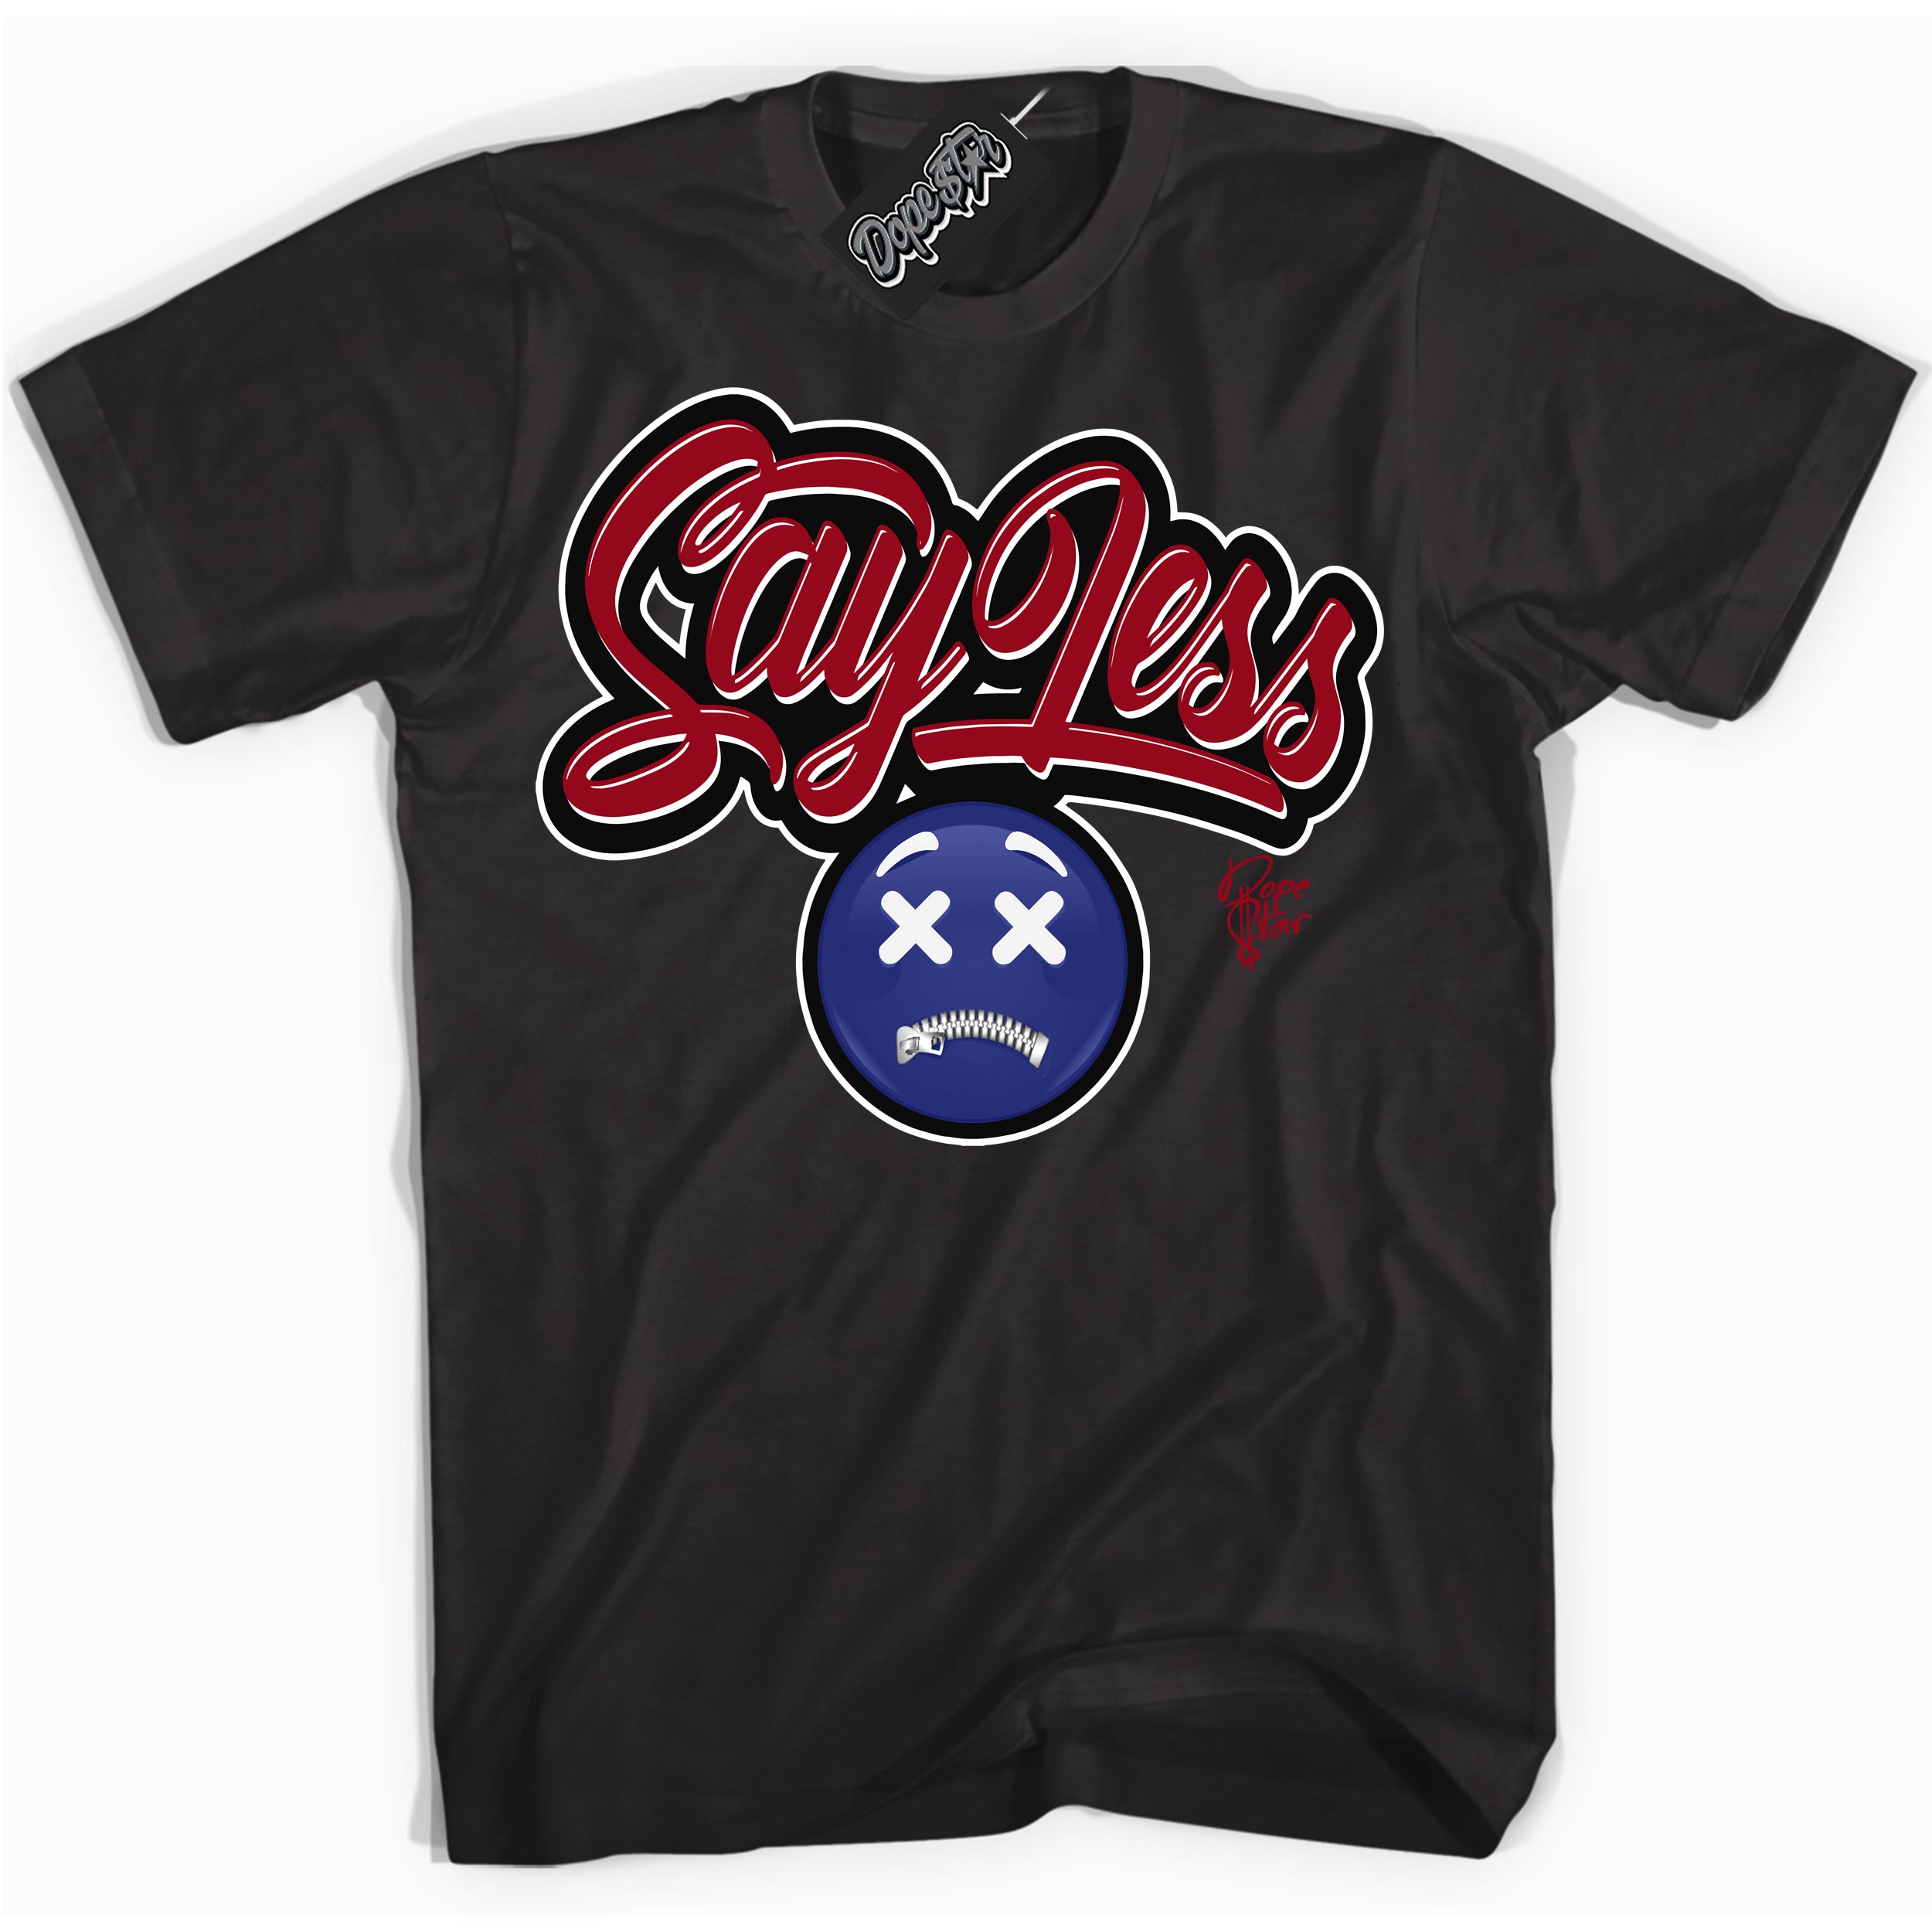 Cool Black Shirt with “ Say Less ” design that perfectly matches Playoffs 8s Sneakers.